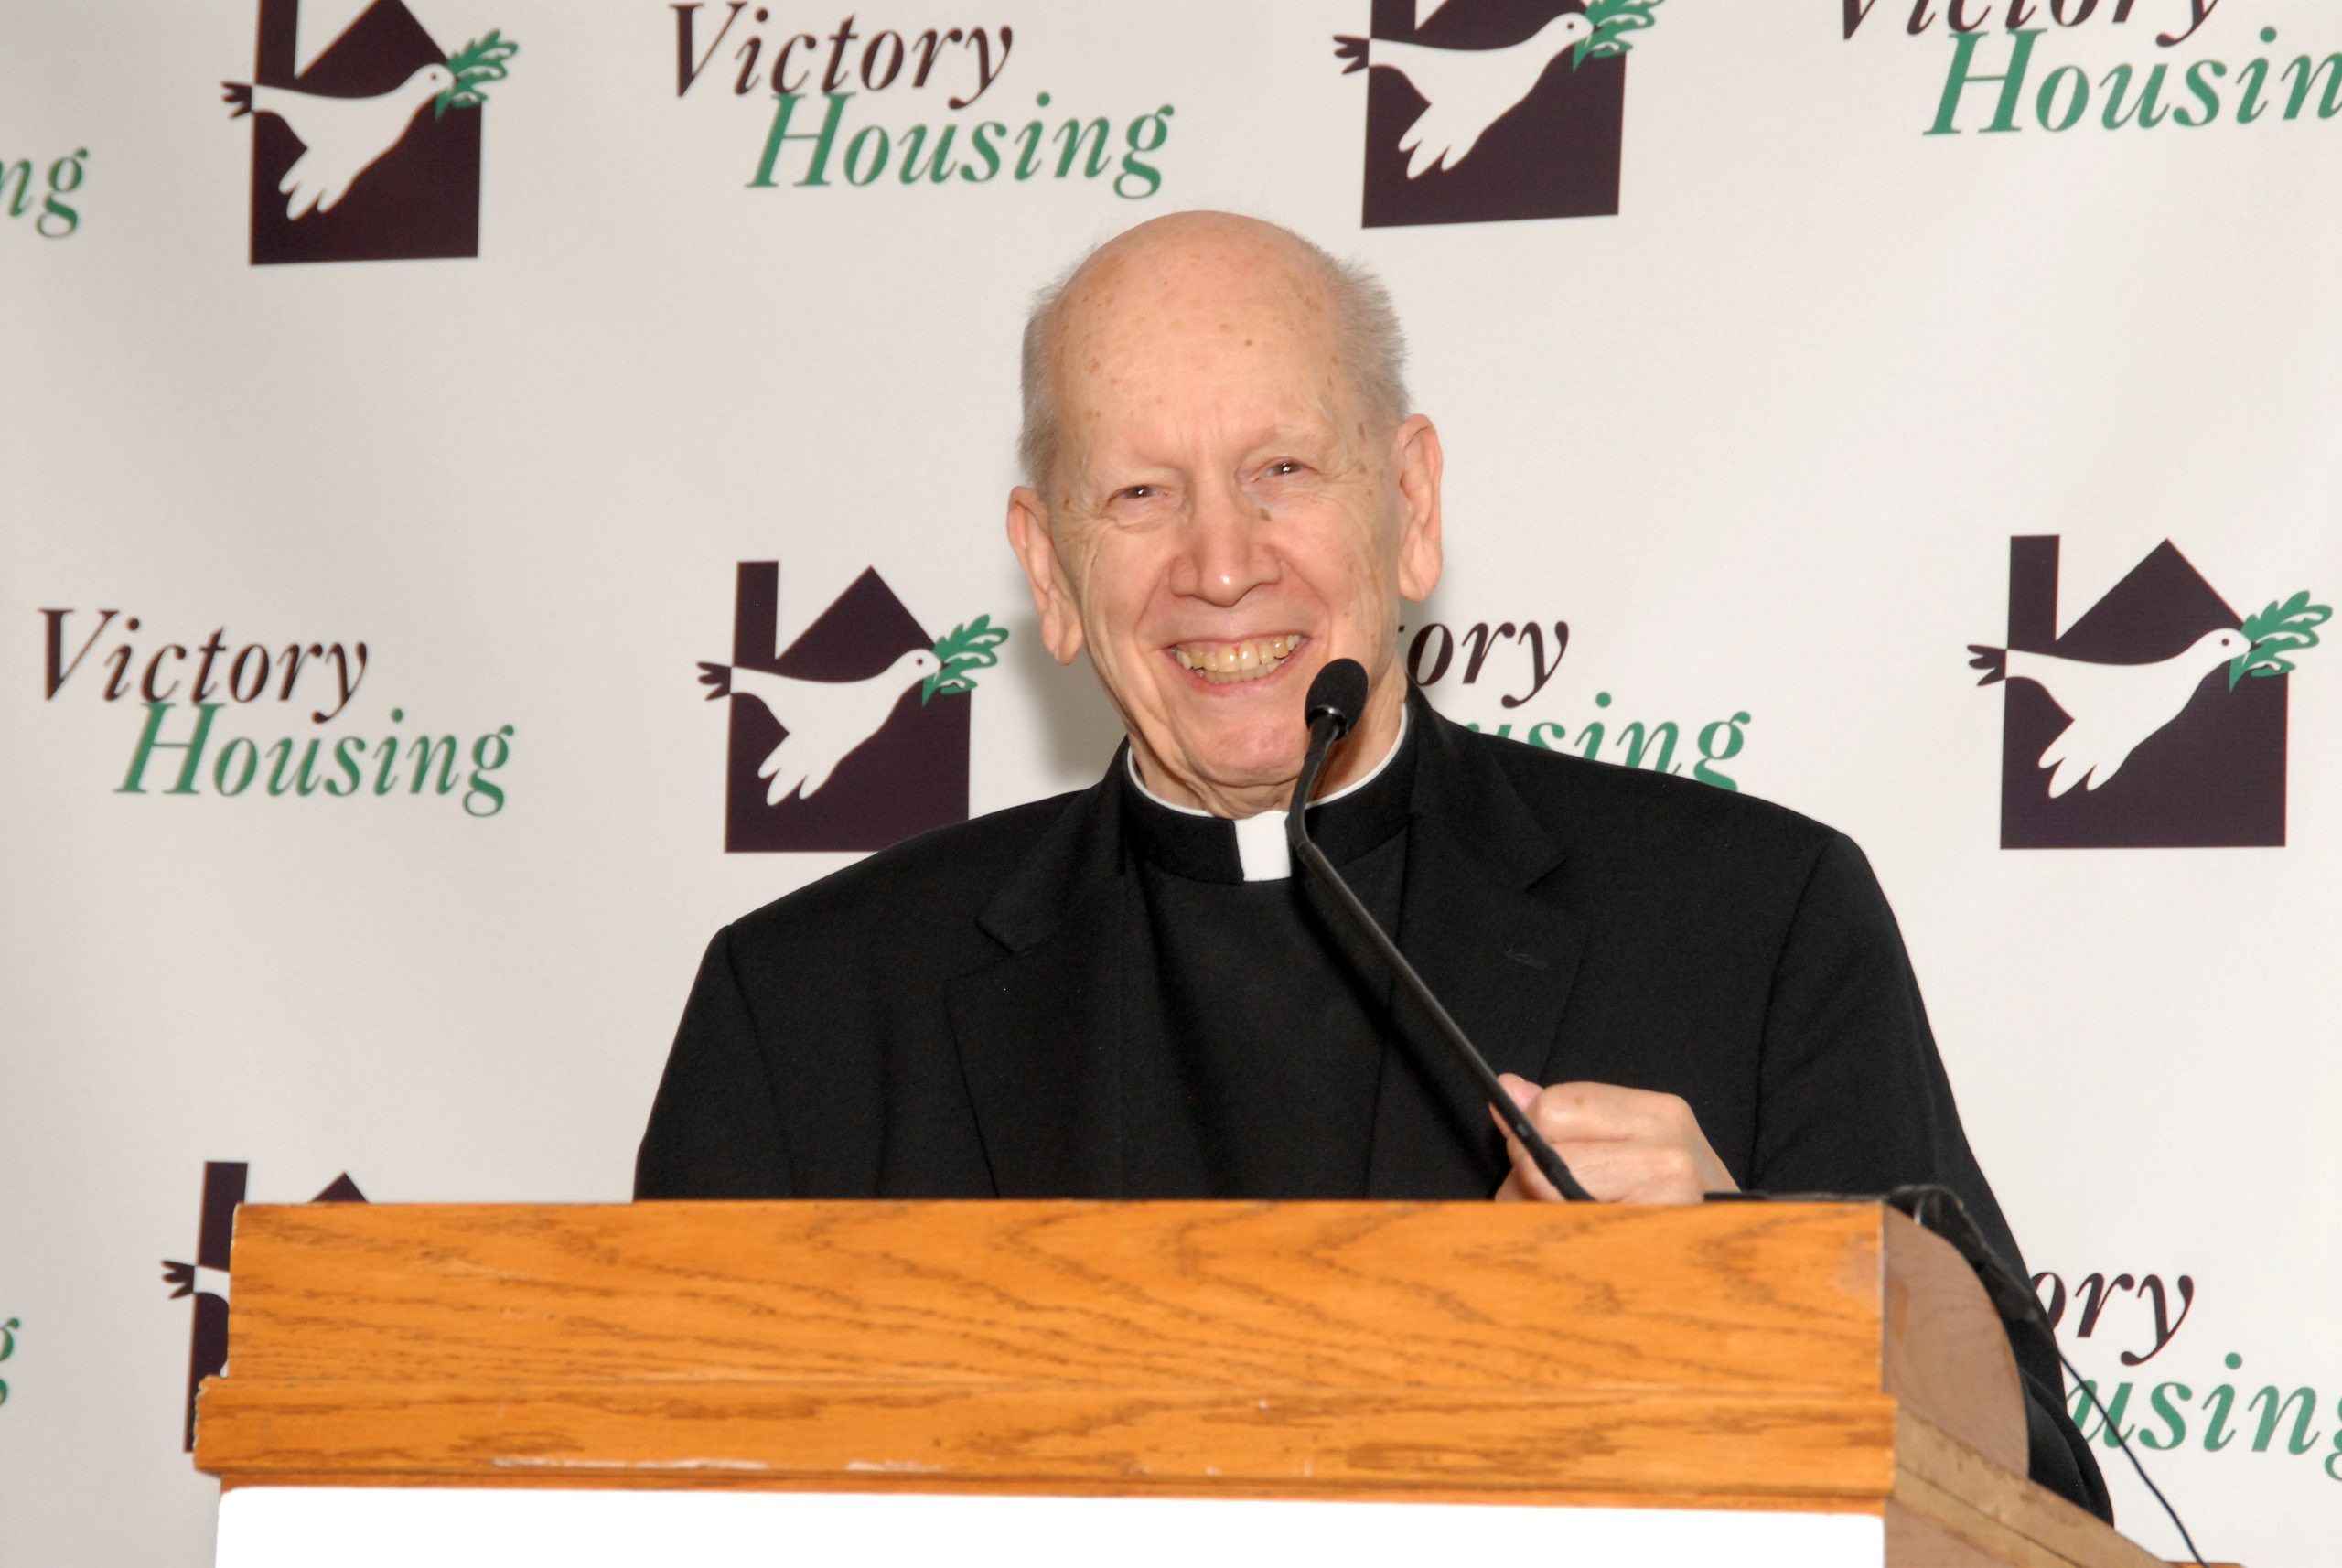 Victory Housing founding father Monsignor Ralph J. Kuehner stands at podium to receive Washingtonian of the Year Award